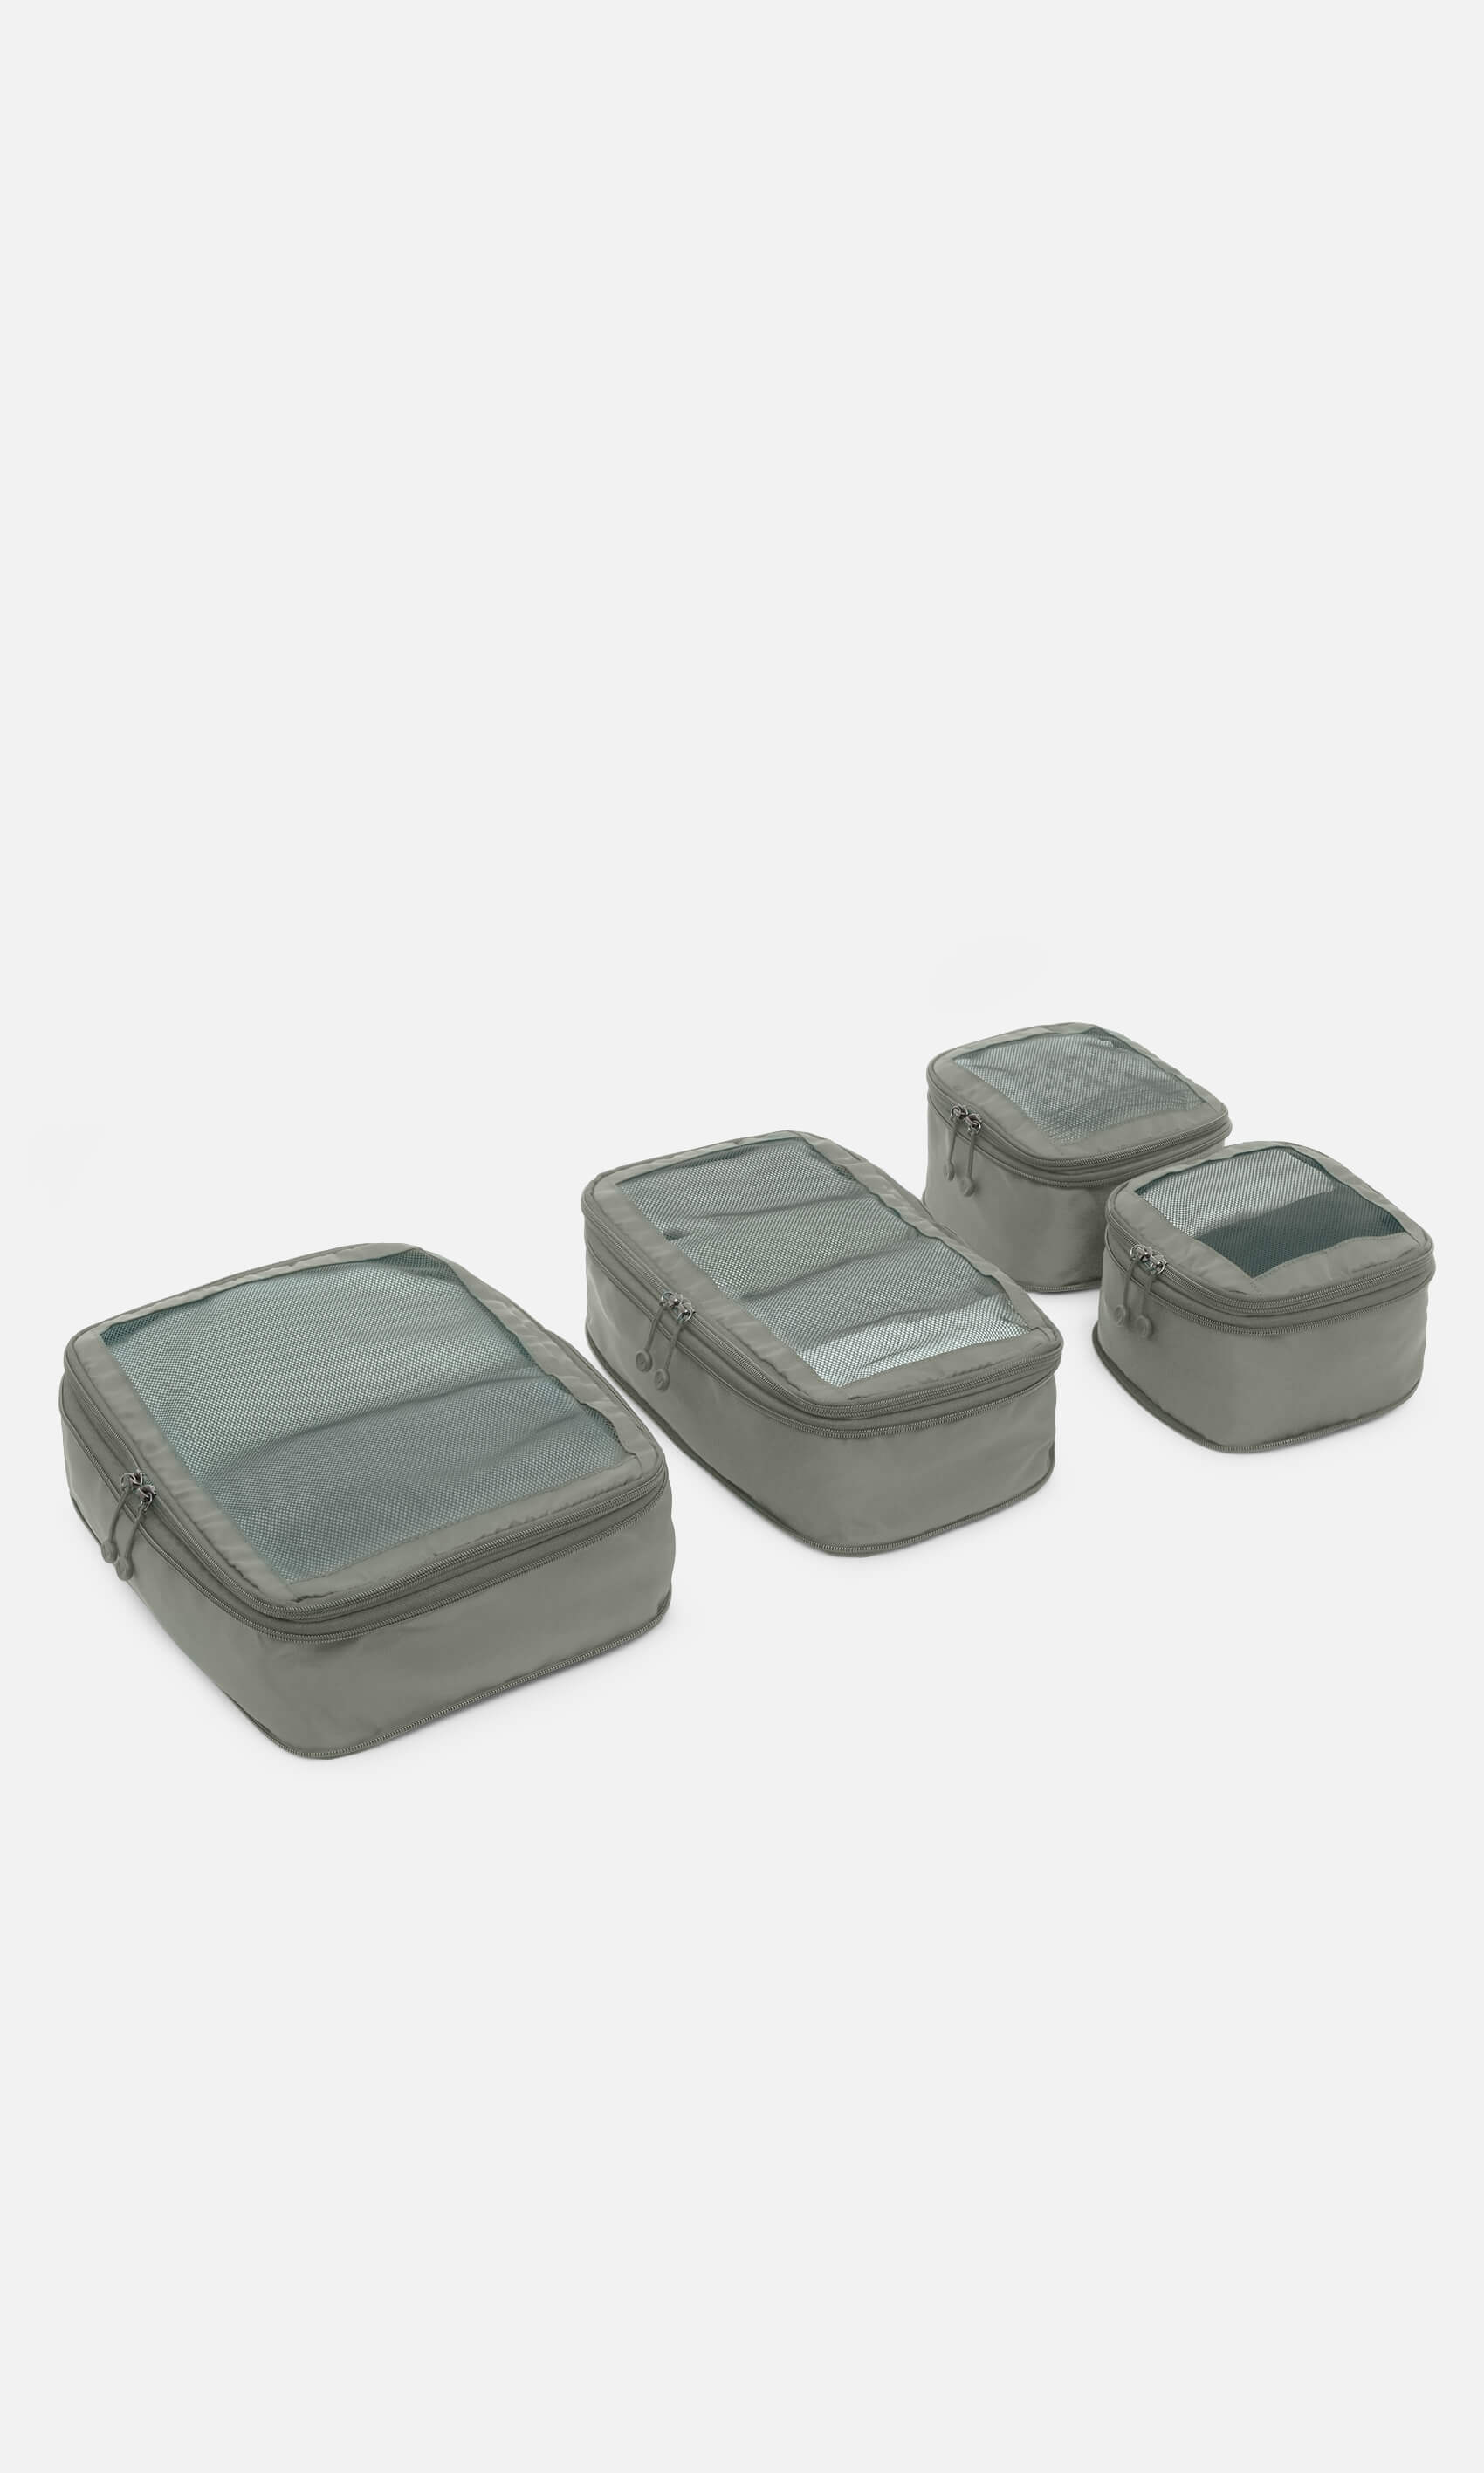 Antler Luggage -  Chelsea 4 packing cubes in sage - Accessories Chelsea 4 Packing Cubes Sage (Green) | Travel Accessories | Antler UK